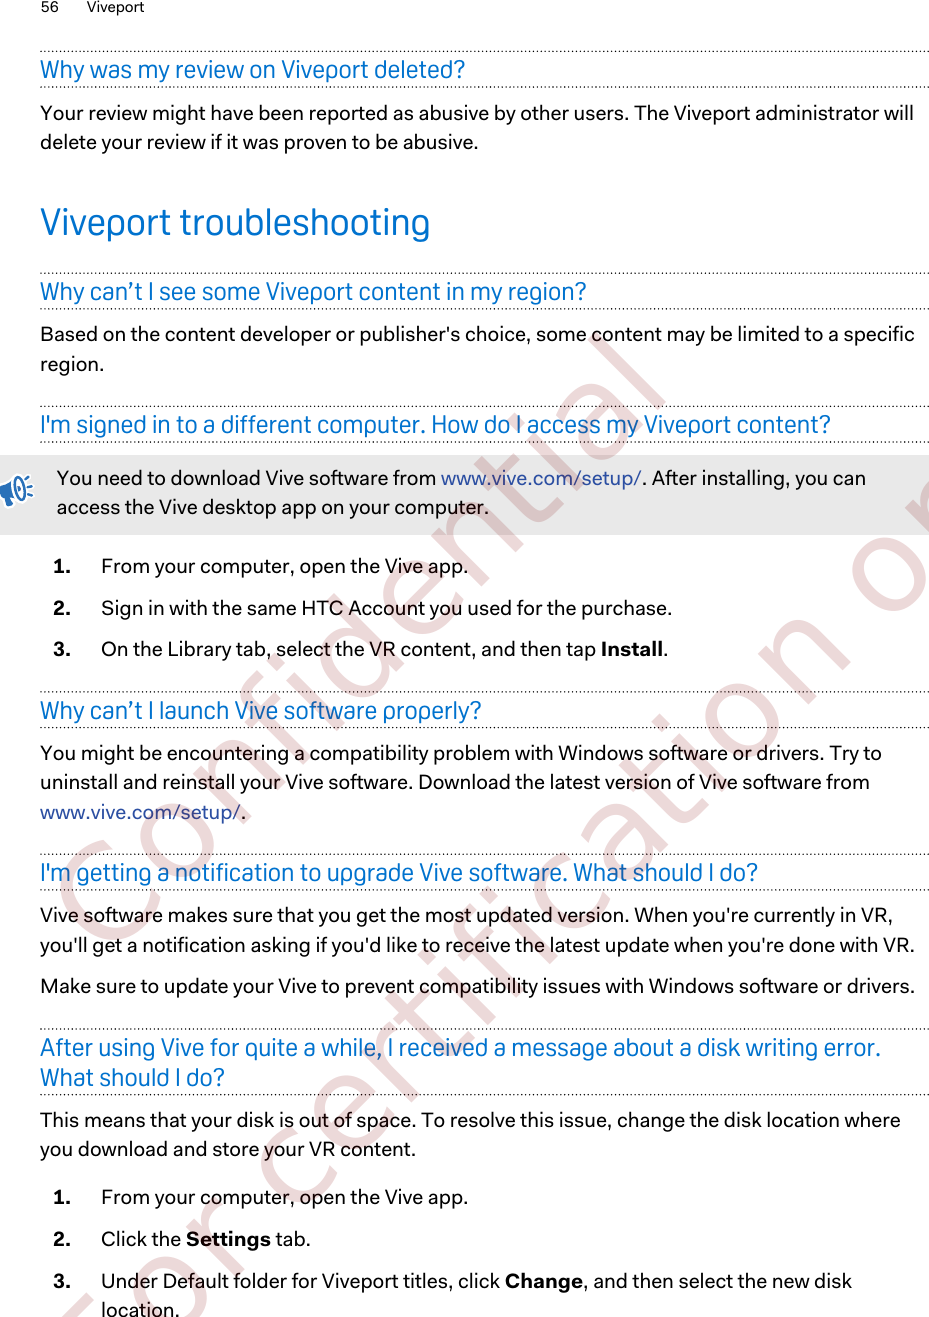 Why was my review on Viveport deleted?Your review might have been reported as abusive by other users. The Viveport administrator willdelete your review if it was proven to be abusive.Viveport troubleshootingWhy can’t I see some Viveport content in my region?Based on the content developer or publisher&apos;s choice, some content may be limited to a specificregion.I&apos;m signed in to a different computer. How do I access my Viveport content?You need to download Vive software from www.vive.com/setup/. After installing, you canaccess the Vive desktop app on your computer.1. From your computer, open the Vive app.2. Sign in with the same HTC Account you used for the purchase.3. On the Library tab, select the VR content, and then tap Install.Why can’t I launch Vive software properly?You might be encountering a compatibility problem with Windows software or drivers. Try touninstall and reinstall your Vive software. Download the latest version of Vive software from www.vive.com/setup/.I&apos;m getting a notification to upgrade Vive software. What should I do?Vive software makes sure that you get the most updated version. When you&apos;re currently in VR,you&apos;ll get a notification asking if you&apos;d like to receive the latest update when you&apos;re done with VR.Make sure to update your Vive to prevent compatibility issues with Windows software or drivers.After using Vive for quite a while, I received a message about a disk writing error.What should I do?This means that your disk is out of space. To resolve this issue, change the disk location whereyou download and store your VR content.1. From your computer, open the Vive app.2. Click the Settings tab.3. Under Default folder for Viveport titles, click Change, and then select the new disklocation.56 Viveport        Confidential  For certification only